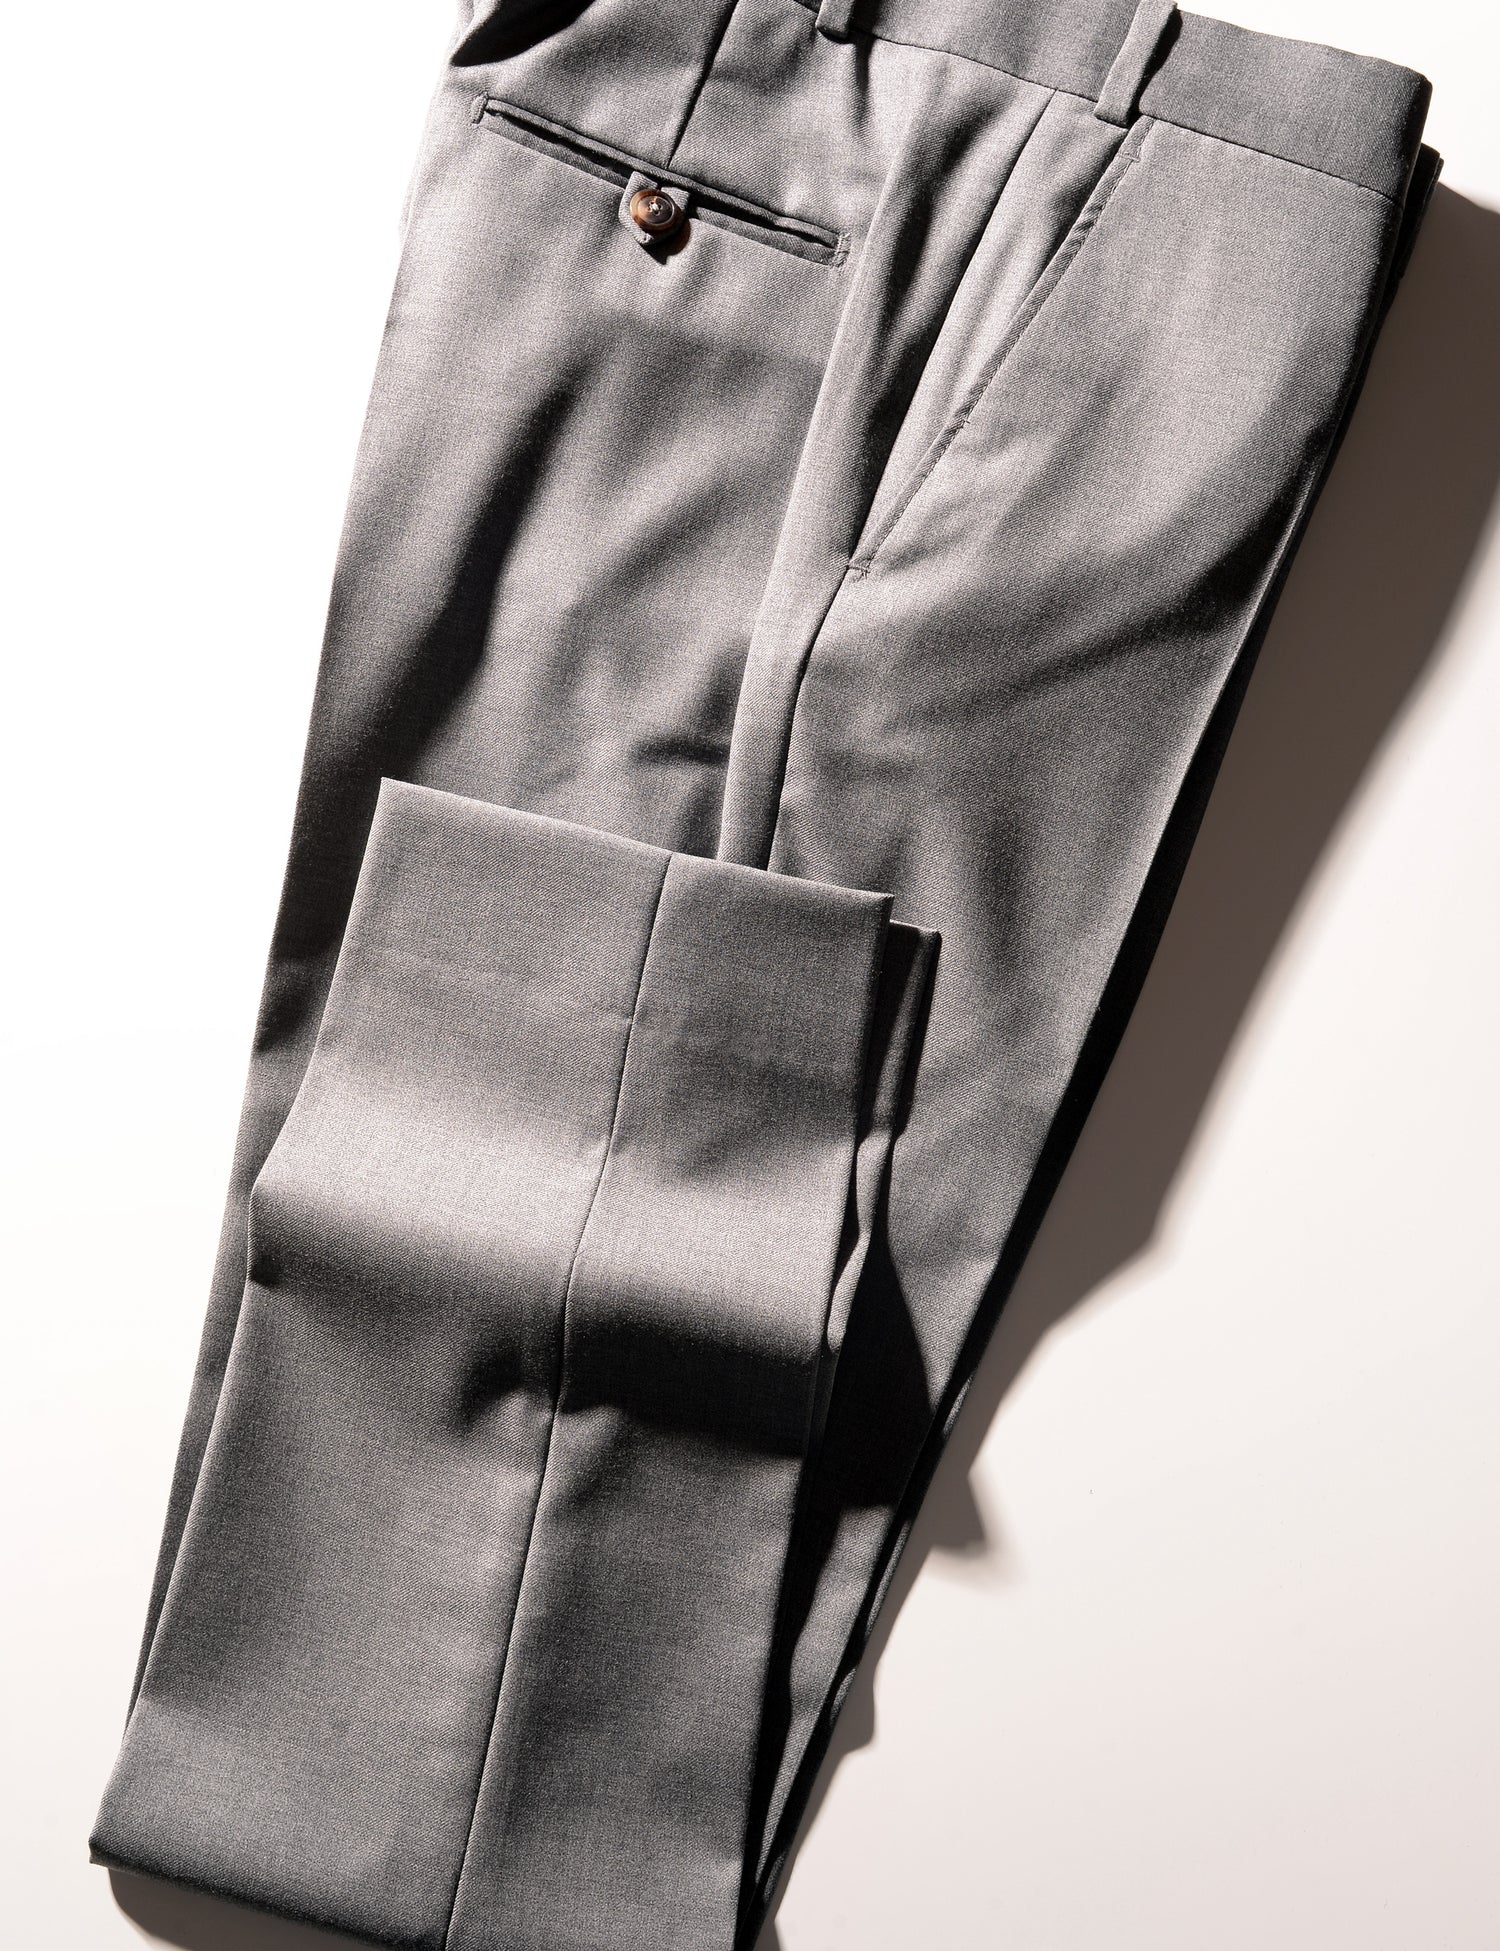 Detail shot of Brooklyn Tailors BKT50 Tailored Trouser in Super 110s Twill - Dove Gray showing hem, side pocket, back pocket, and waistband